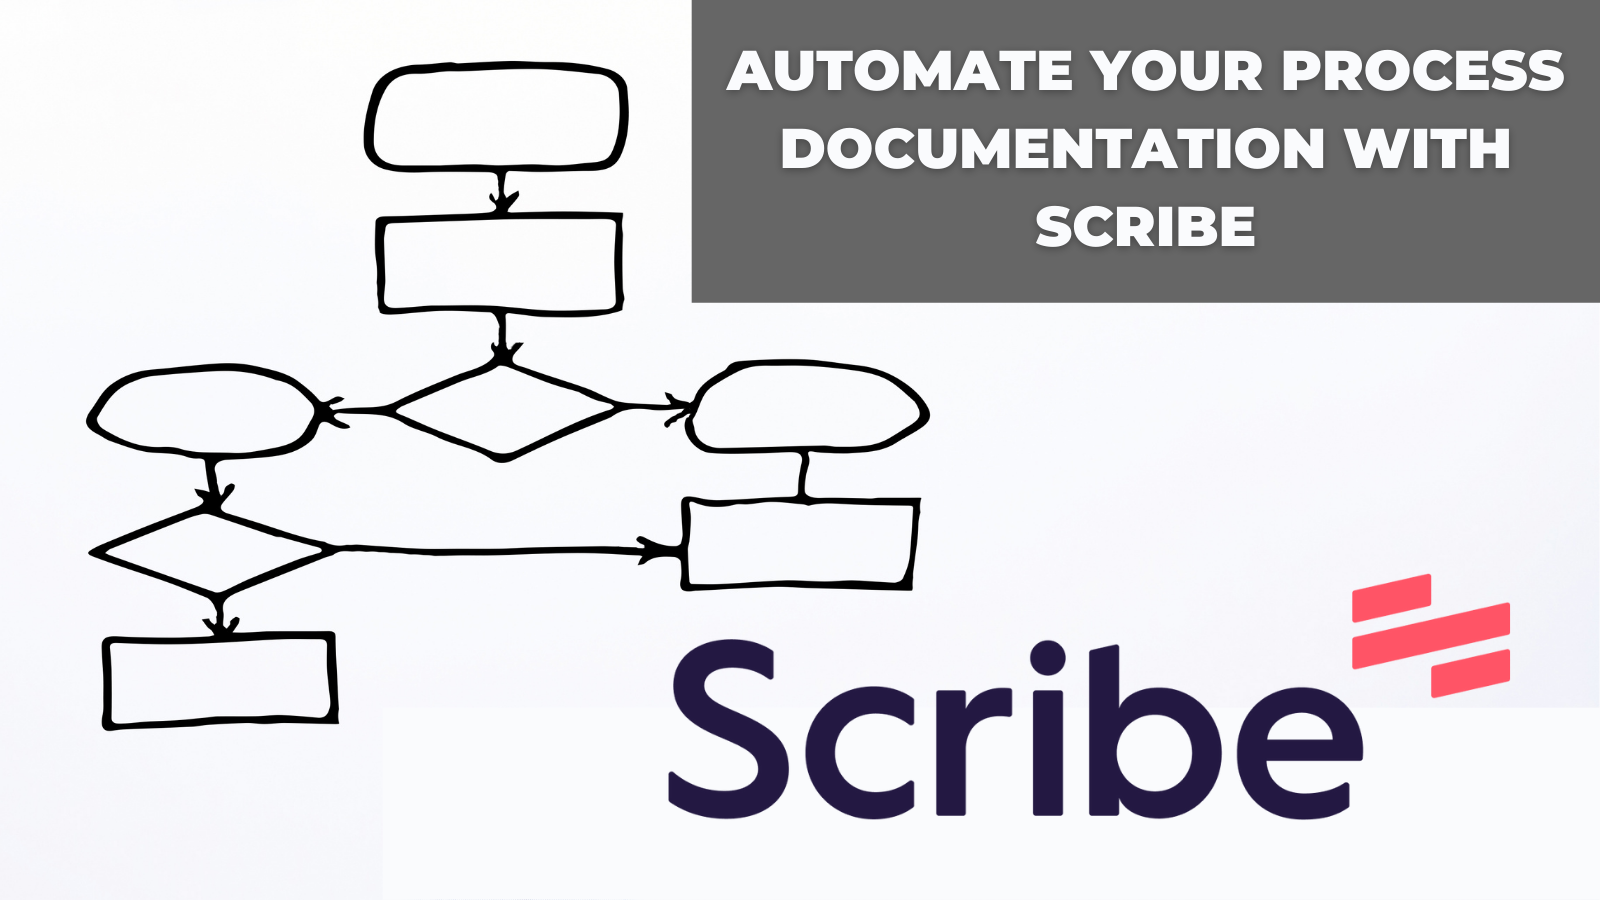 Automate your process documentation with Scribe